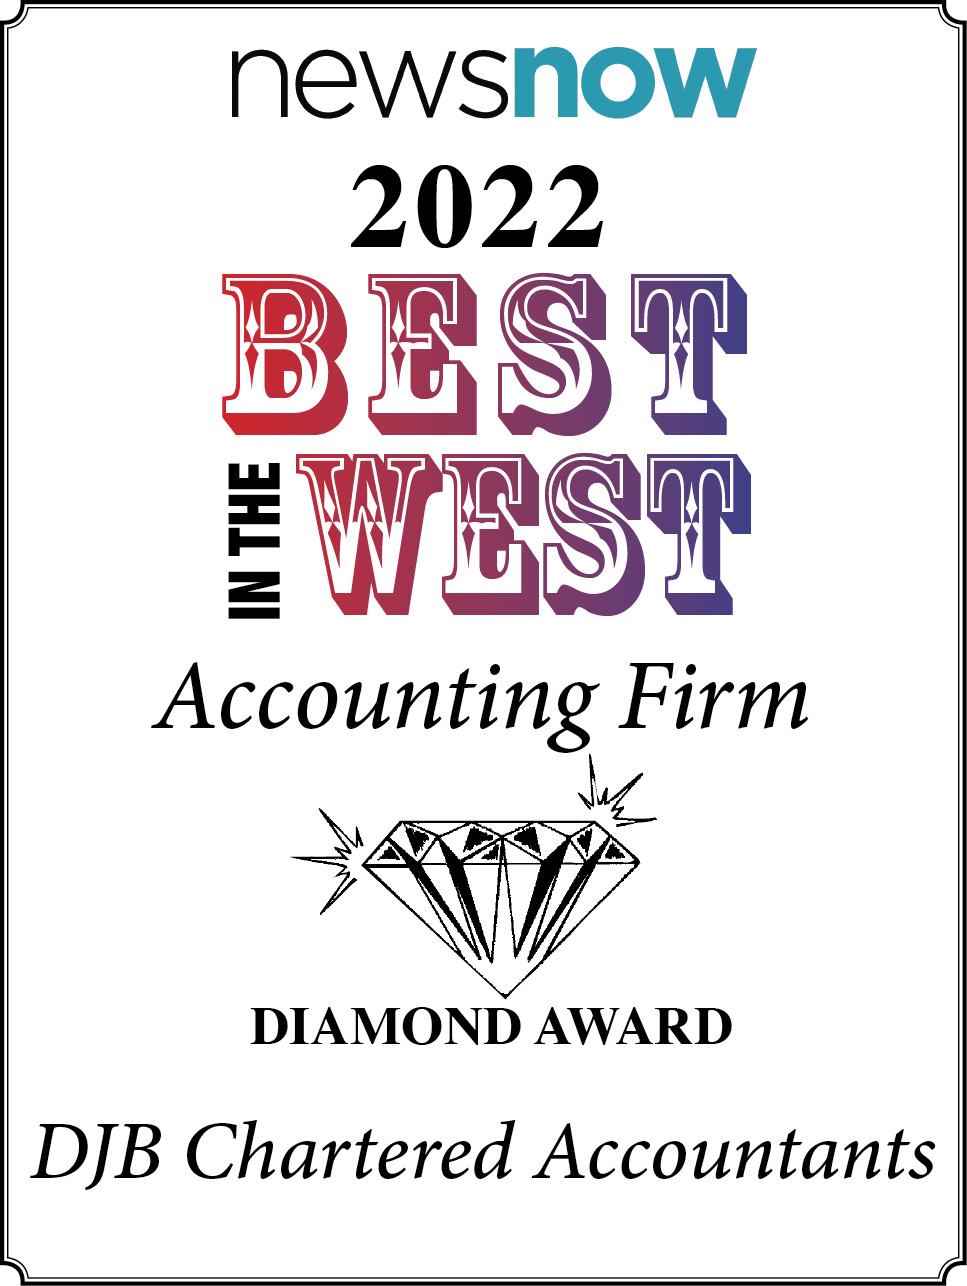 Diamond Award for Accounting Firm with a diamond icon